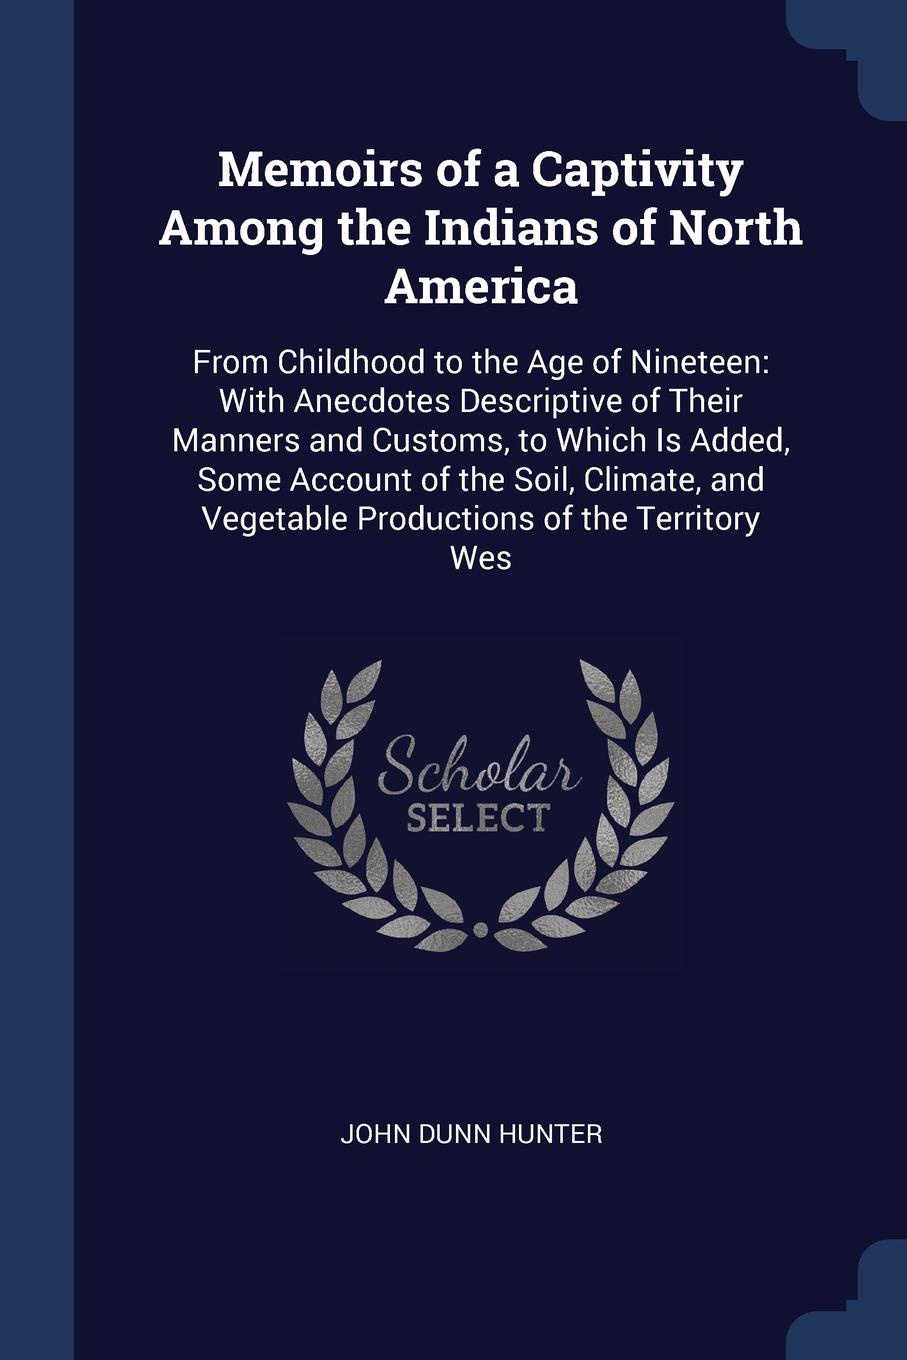 Memoirs of a Captivity Among the Indians of North America. From Childhood to the Age of Nineteen: With Anecdotes Descriptive of Their Manners and Customs, to Which Is Added, Some Account of the Soil, Climate, and Vegetable Productions of the Terri...